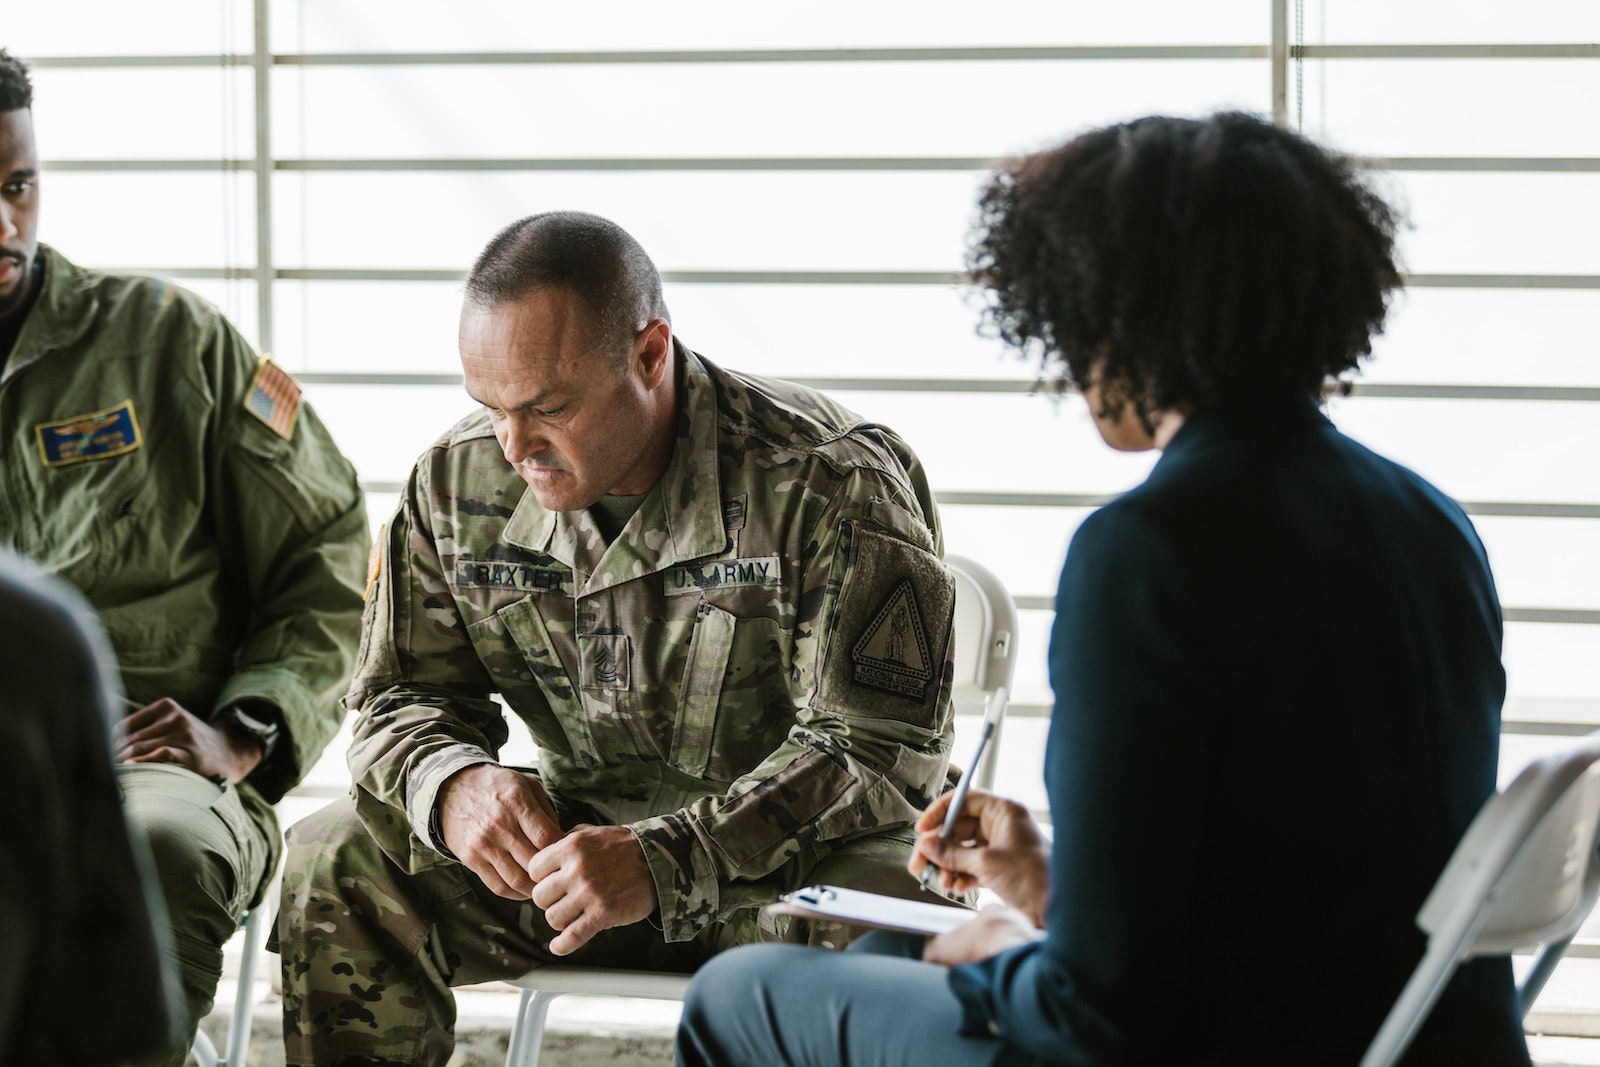 Hypnotherapy for PTSD : Does It Work?